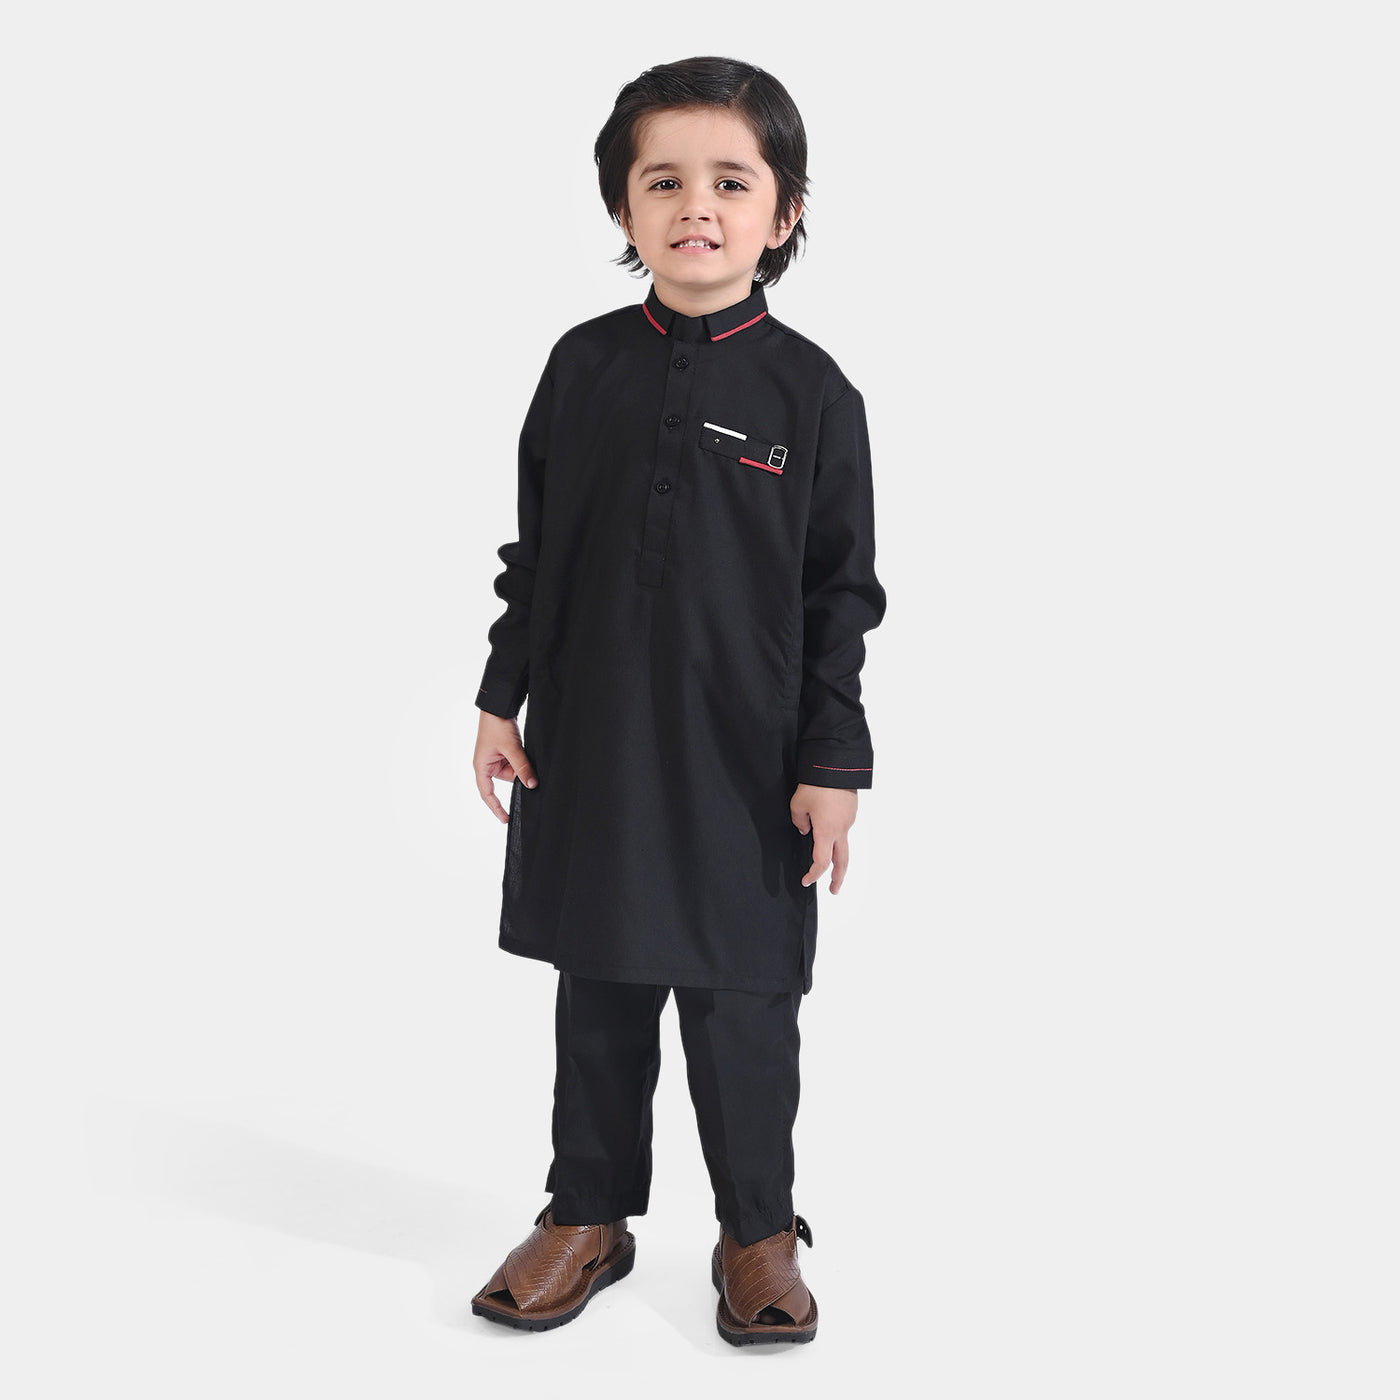 Boys Poly Viscose 2PC Suit Double Band Collar -BLACK